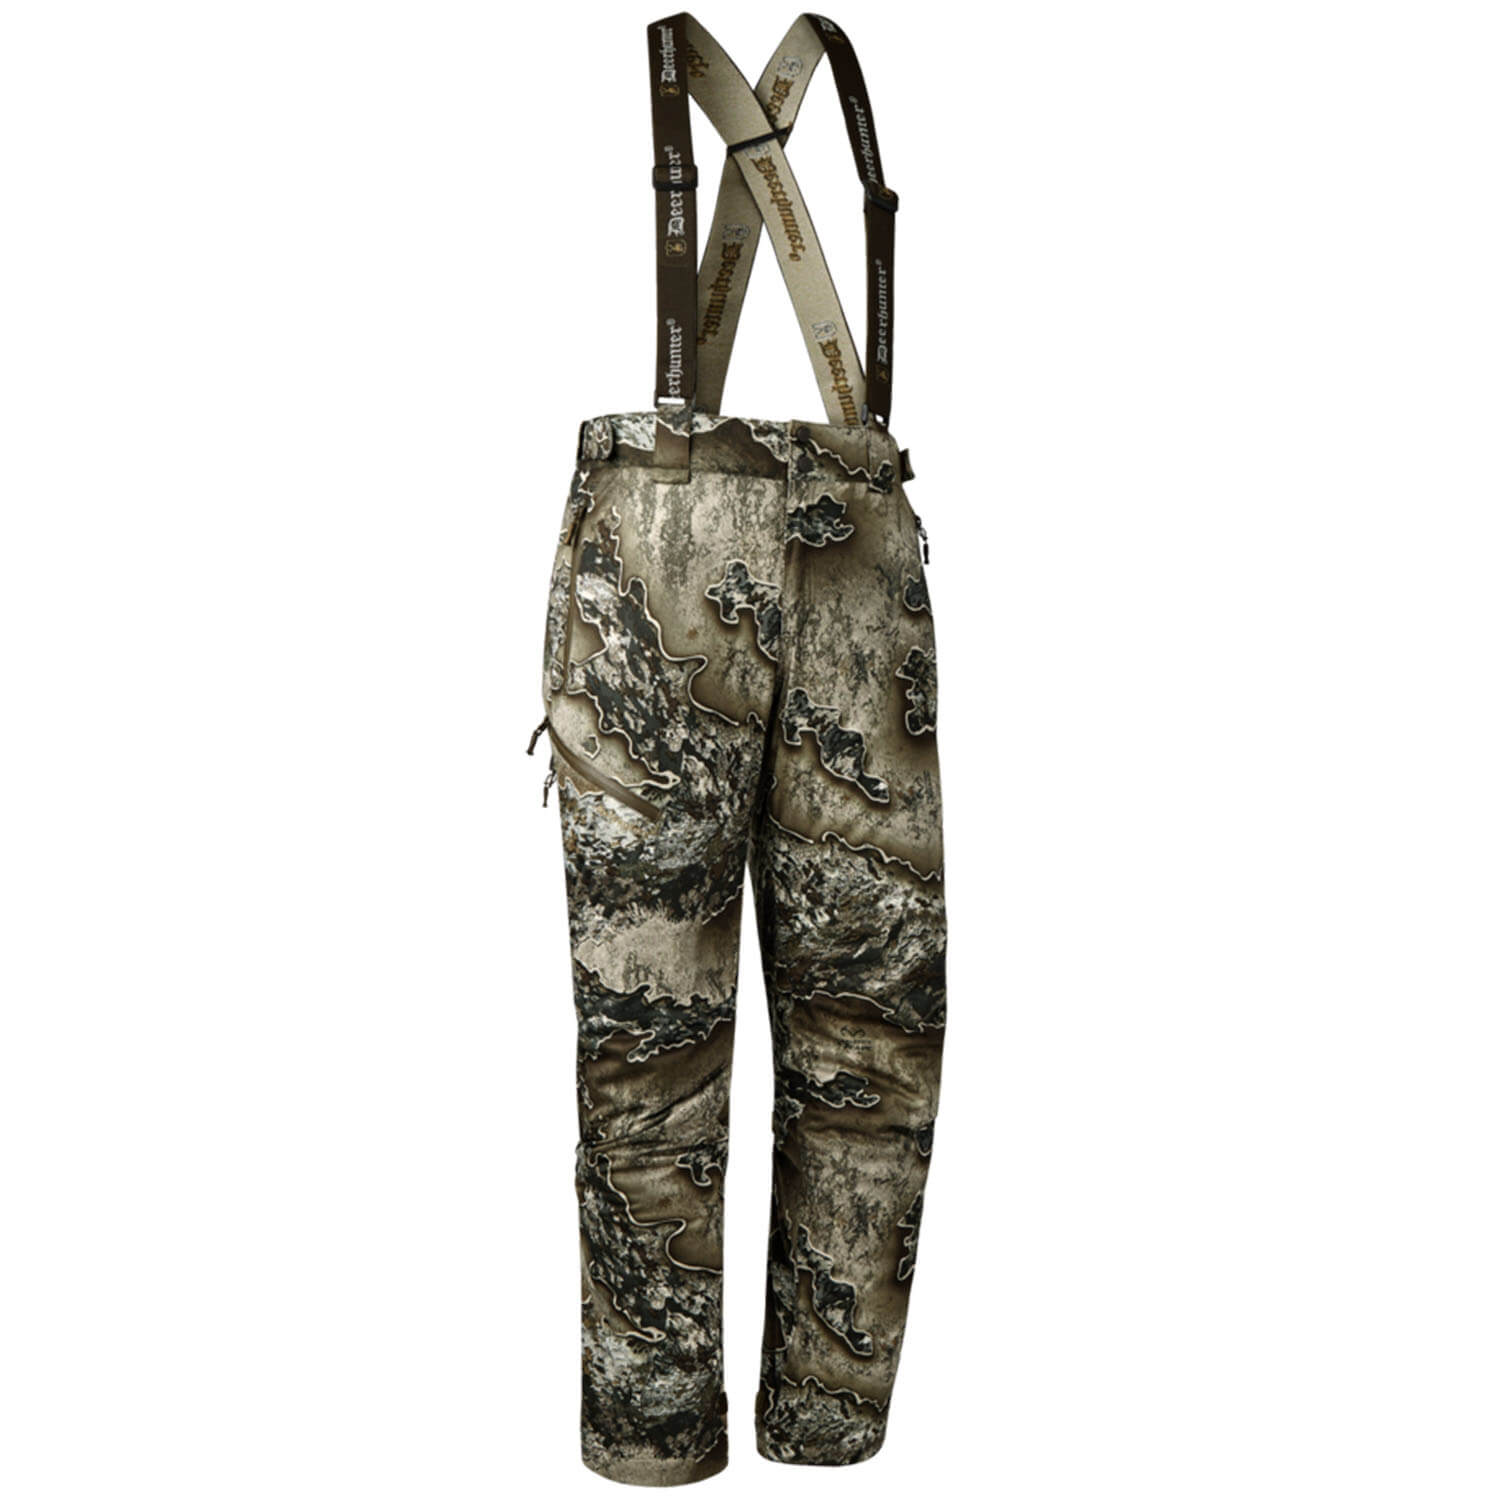 Deerhunter winter trousers Excape (realtree excape) - Winter Hunting Clothing